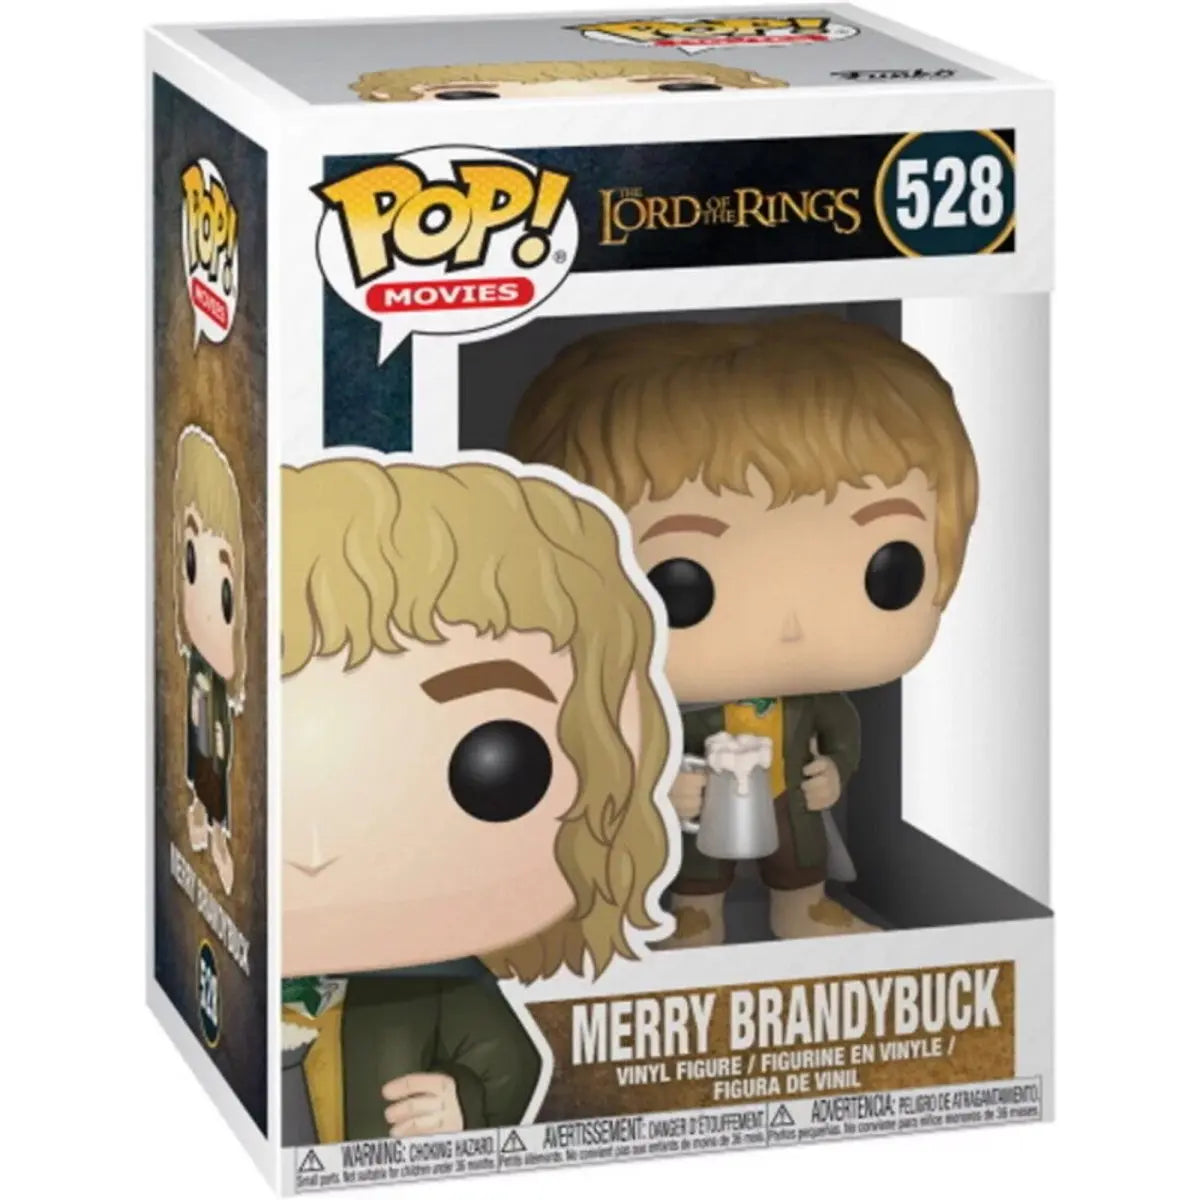 Funko Pop! Movies the Lord of the Rings 528 Merry Brandybuck Funko